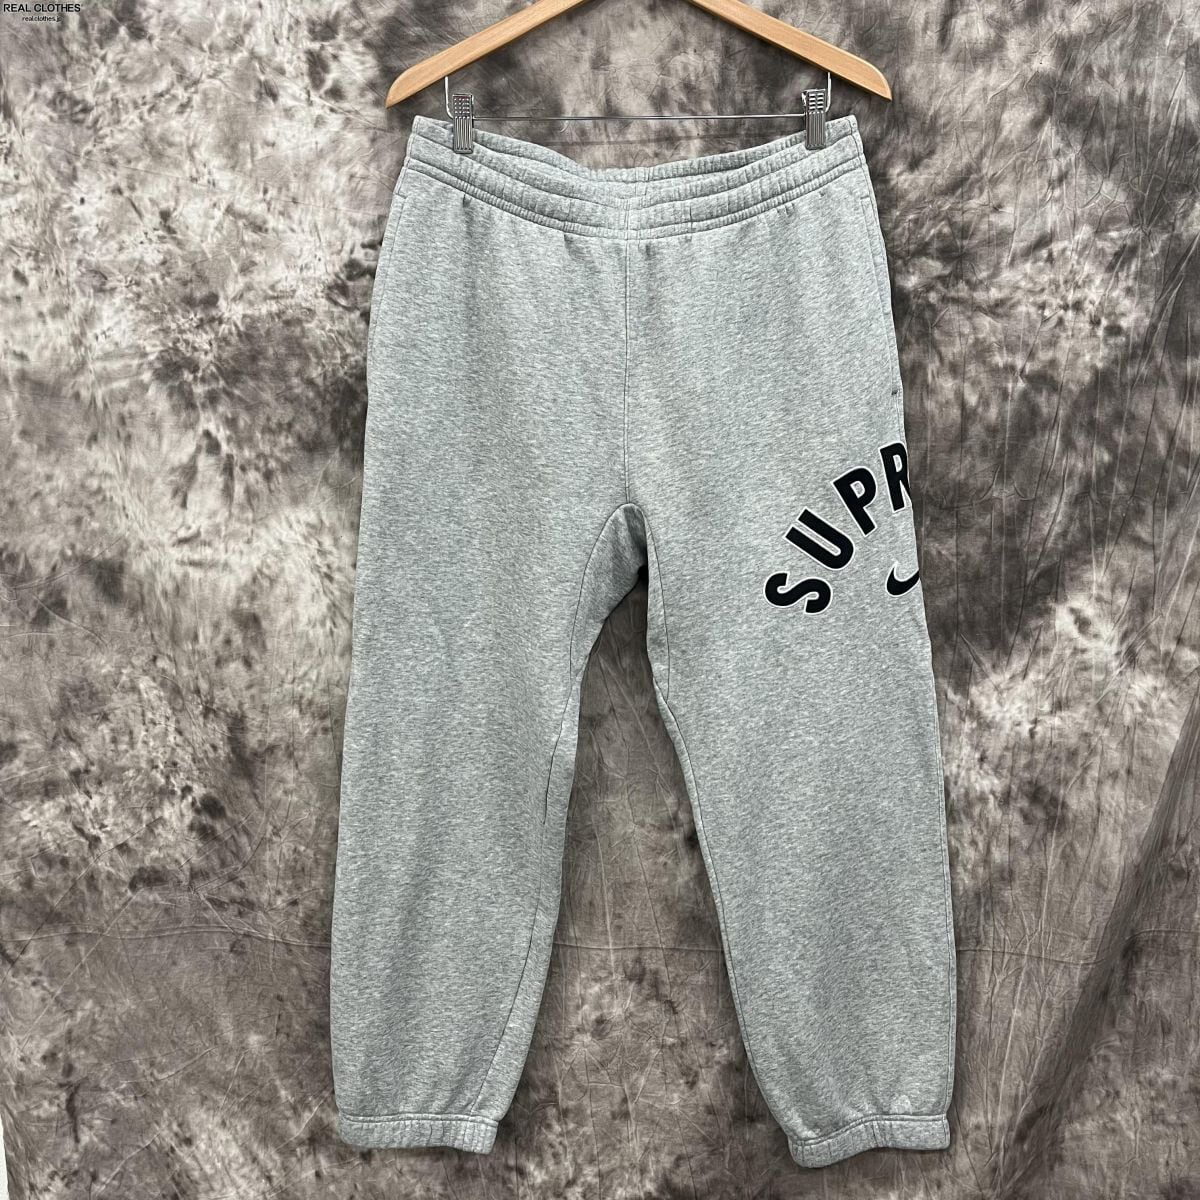 Supreme×NIKEシュプリーム×ナイキ【22SS】Arc Sweatpant/アーチ スウェットパンツ DM1778-050/M |  REALCLOTHES/リアルクローズ powered by BASE